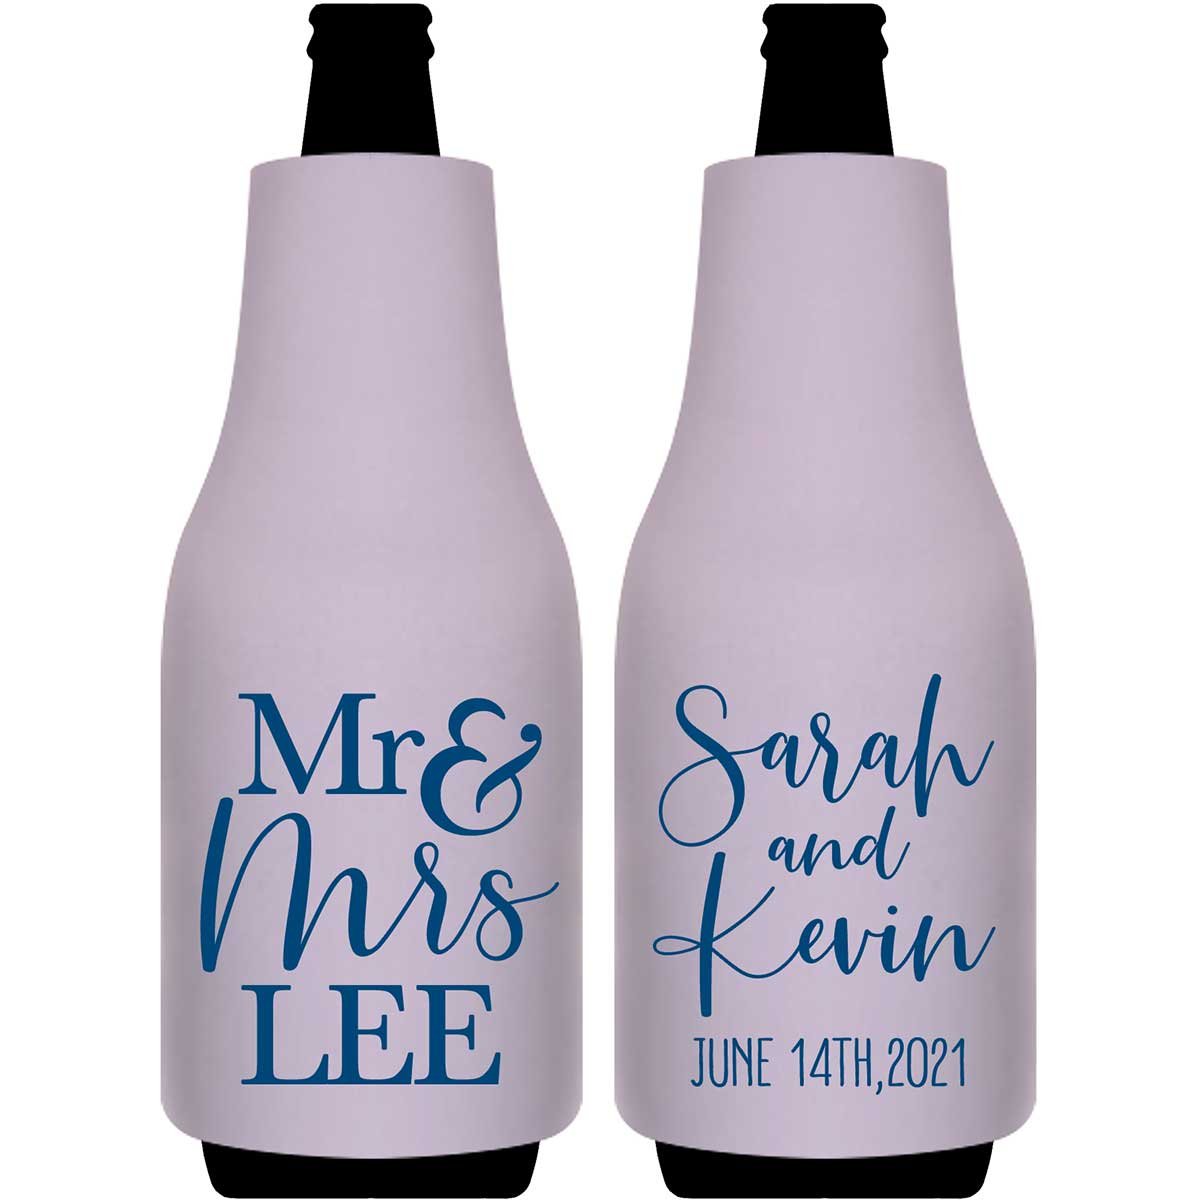 Mr & Mrs 3A Foldable Bottle Sleeve Koozies Wedding Gifts for Guests